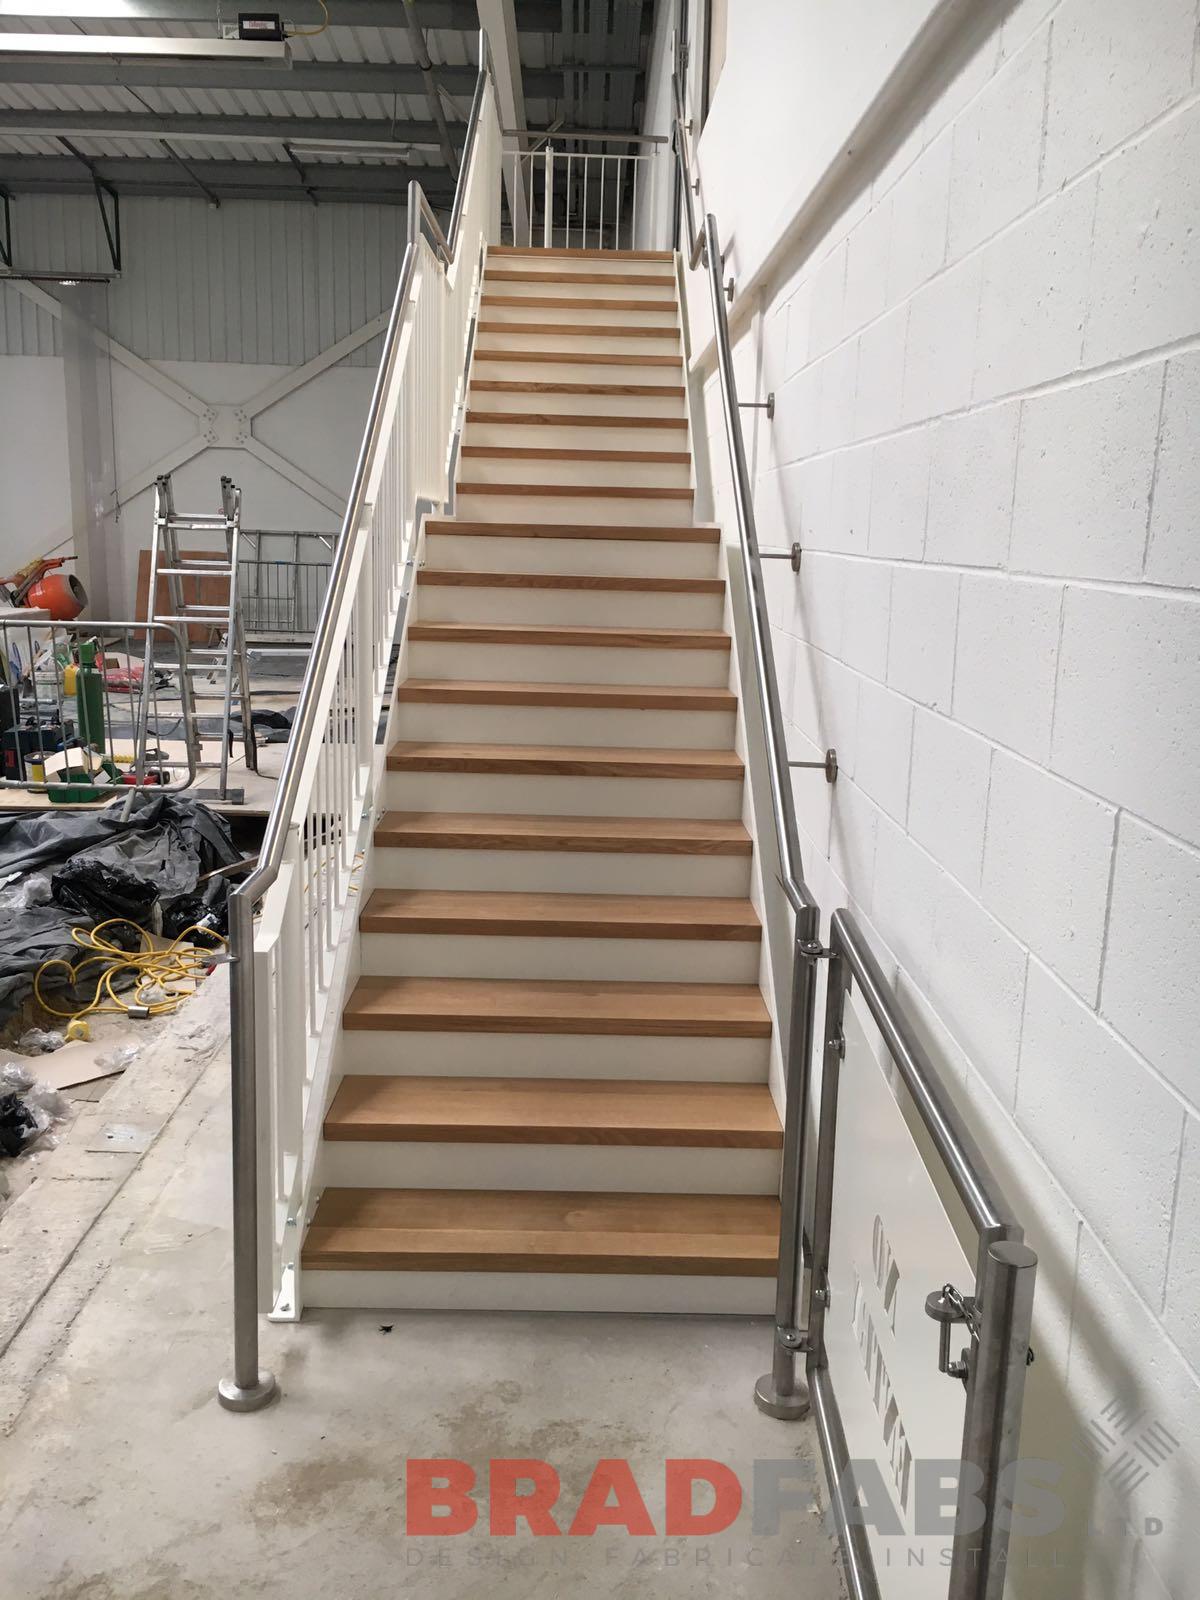 Bespoke steel staircase for Aintree Racecourse